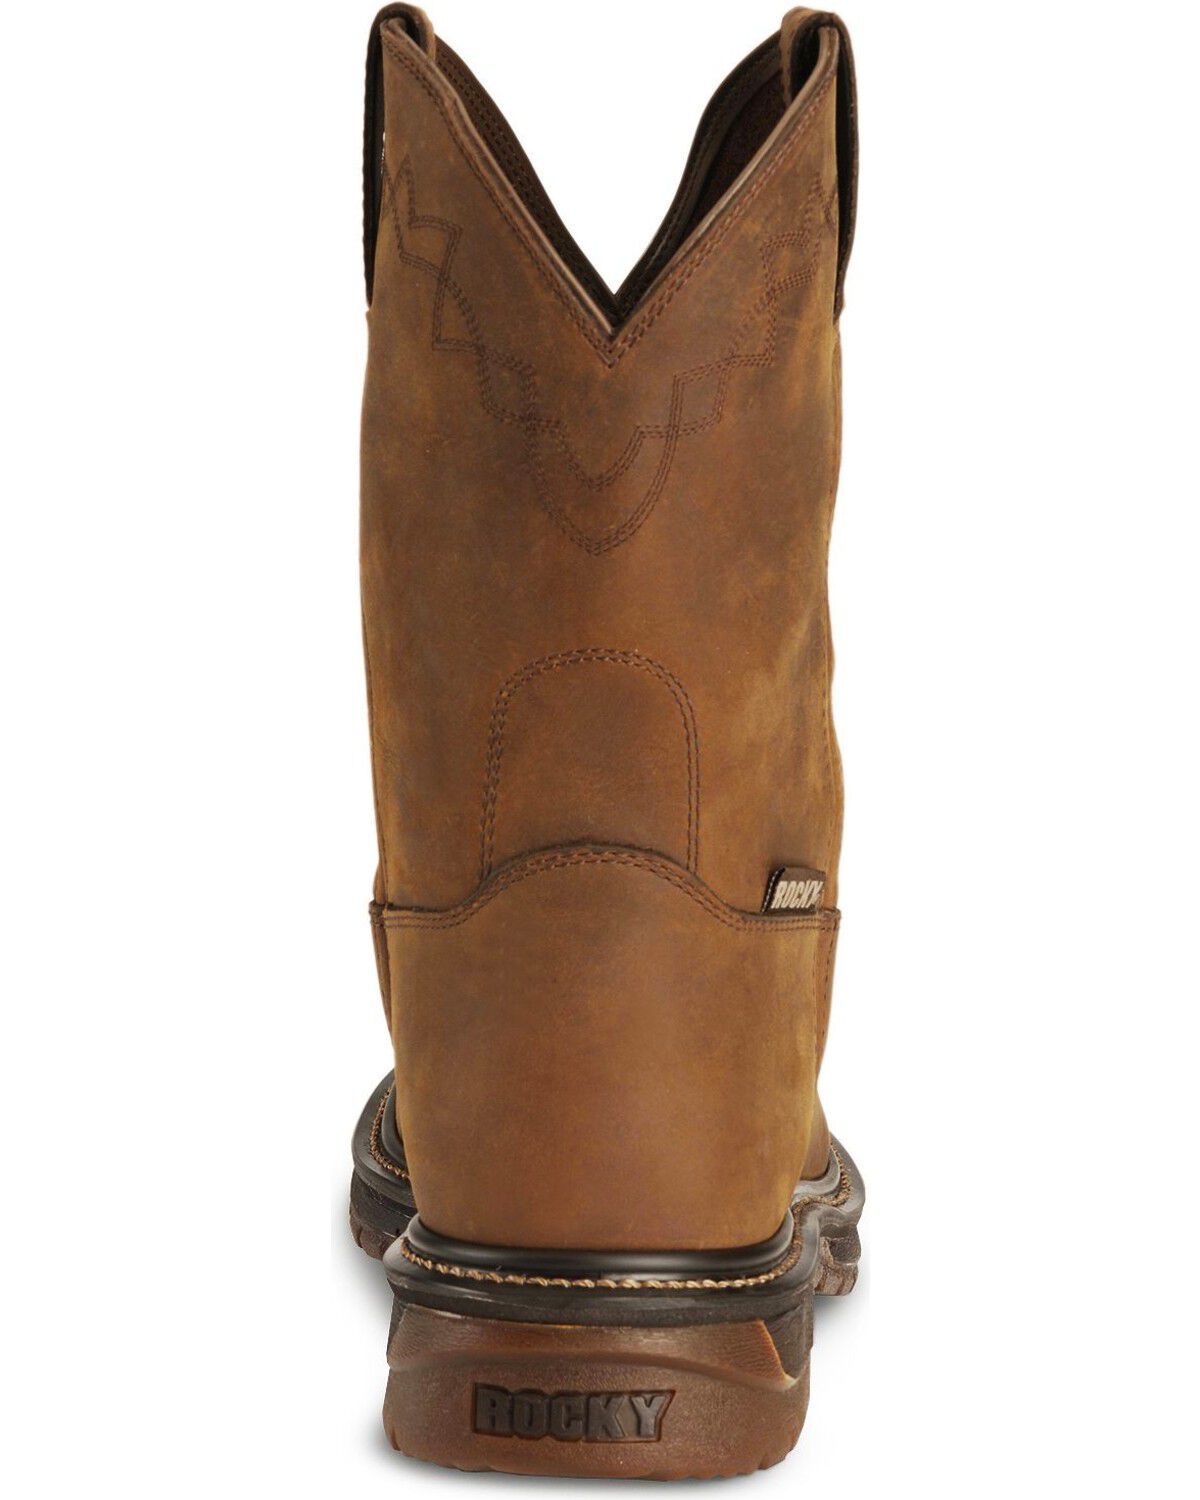 rocky ride roper boots